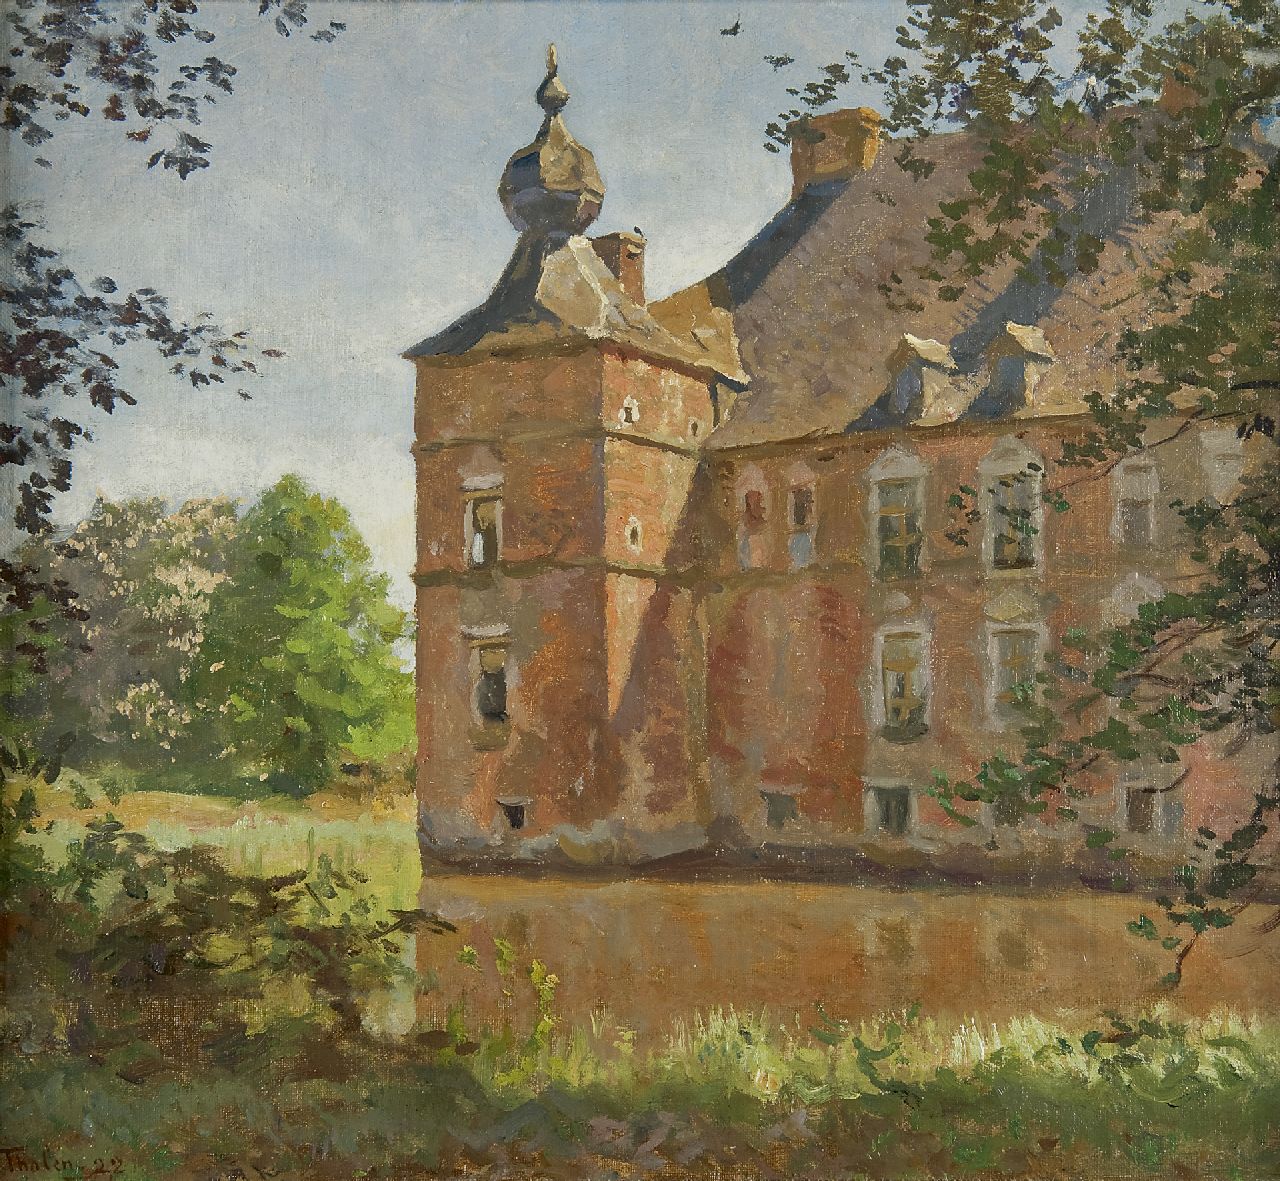 Tholen W.B.  | Willem Bastiaan Tholen, The Cannenburgh castle in summer, oil on canvas laid down on panel 37.3 x 41.4 cm, signed l.l. and dated '22